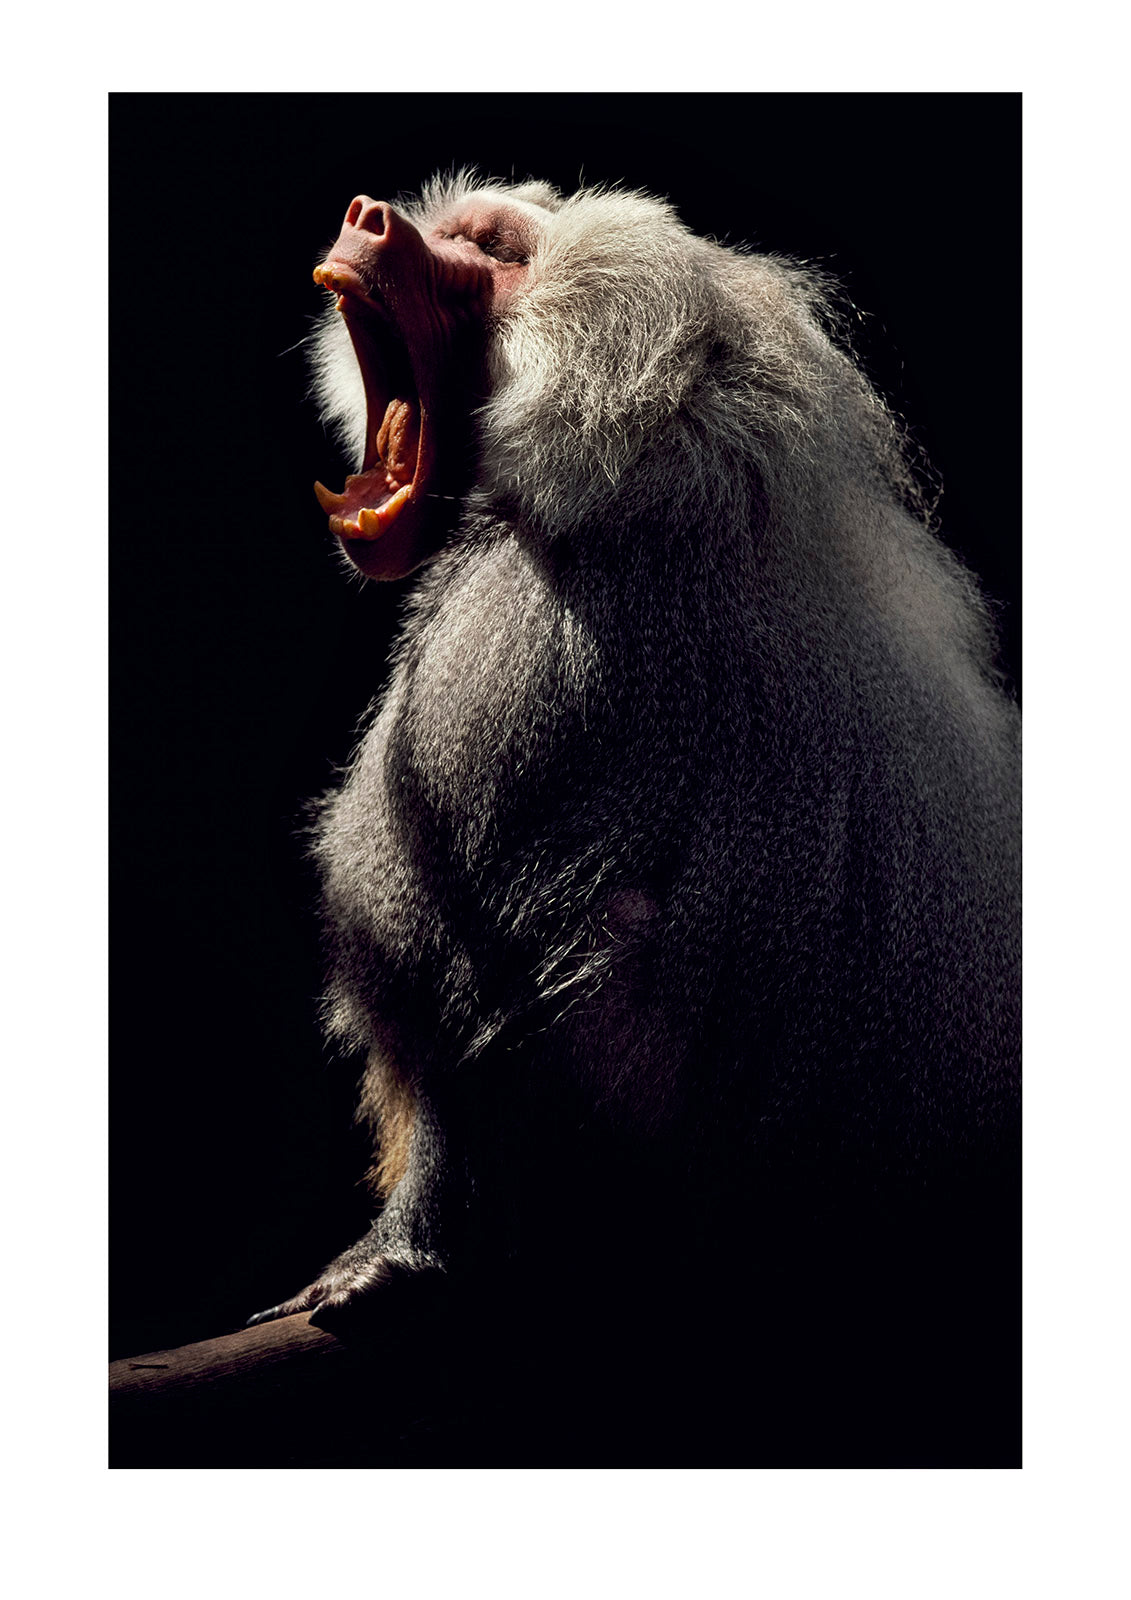 A Sacred Baboon (Papio hamondryas) lets out an early morning yawn. Melbourne Zoological Gardens, Melbourne Zoo, Victoria, Australia.